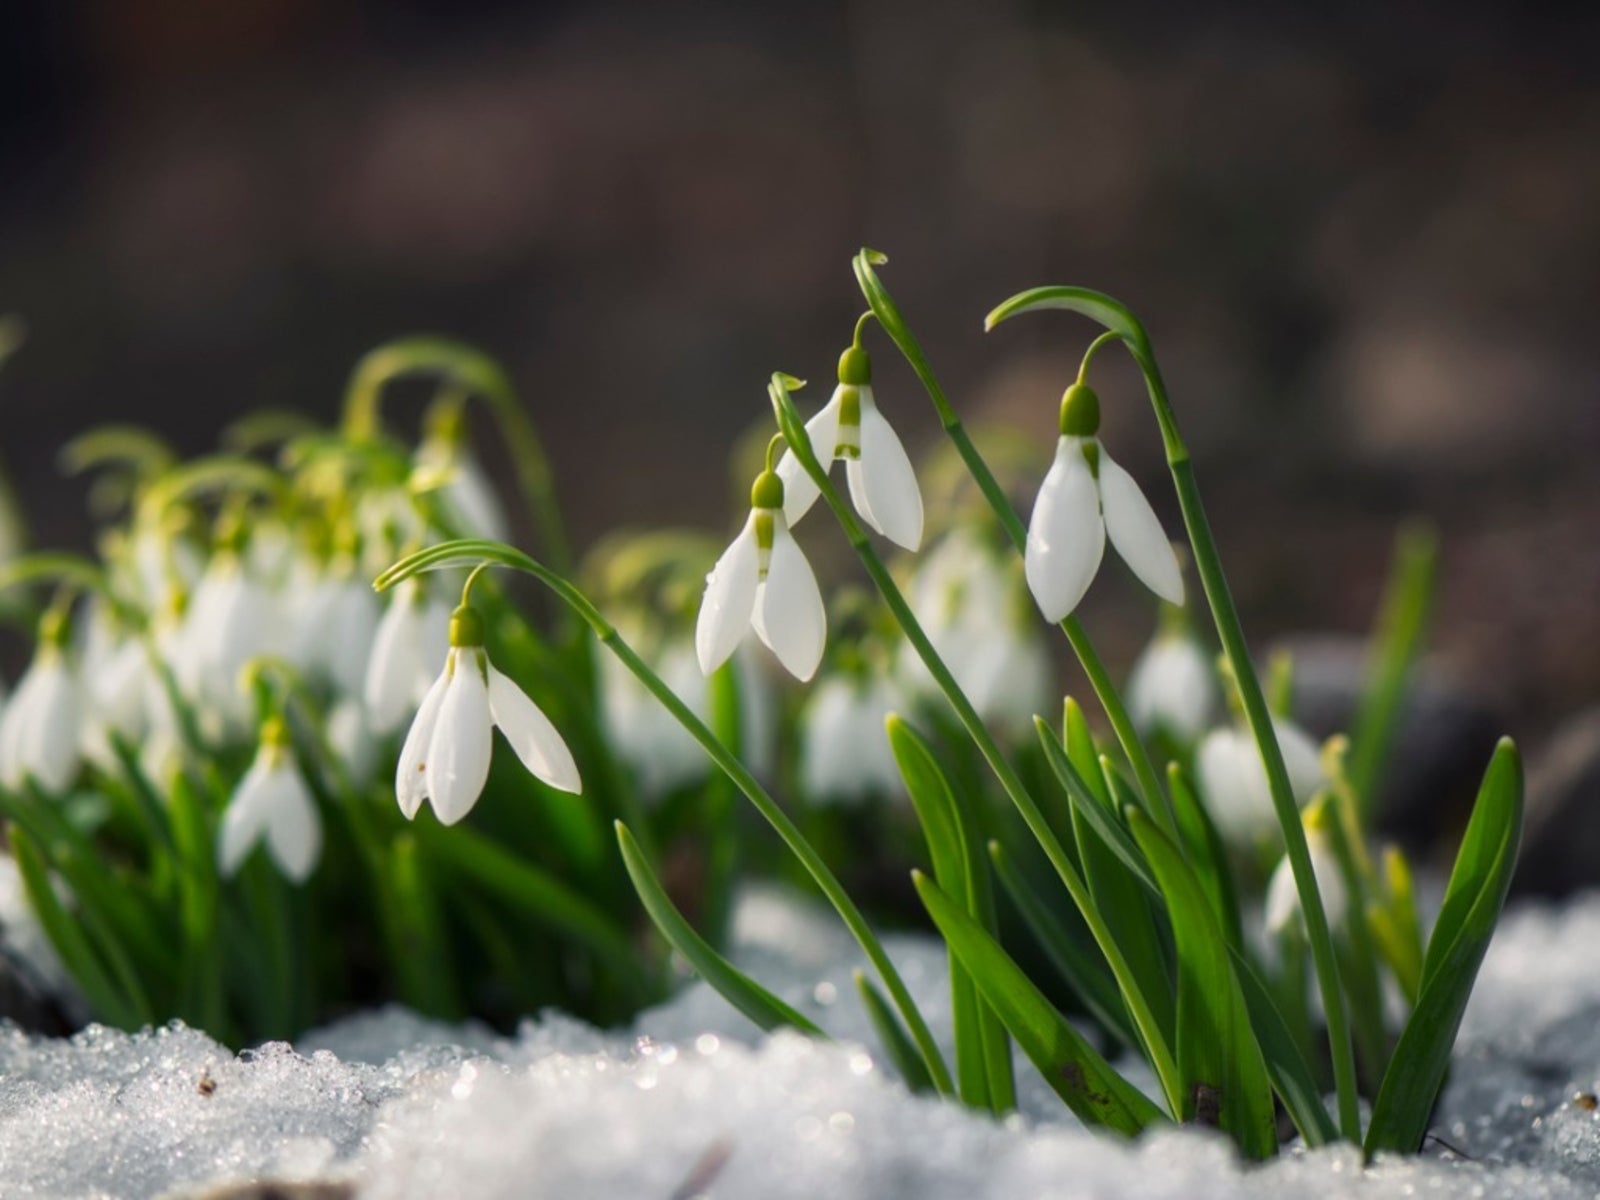 Snowdrop Flower Bulbs Surrounded By Snow